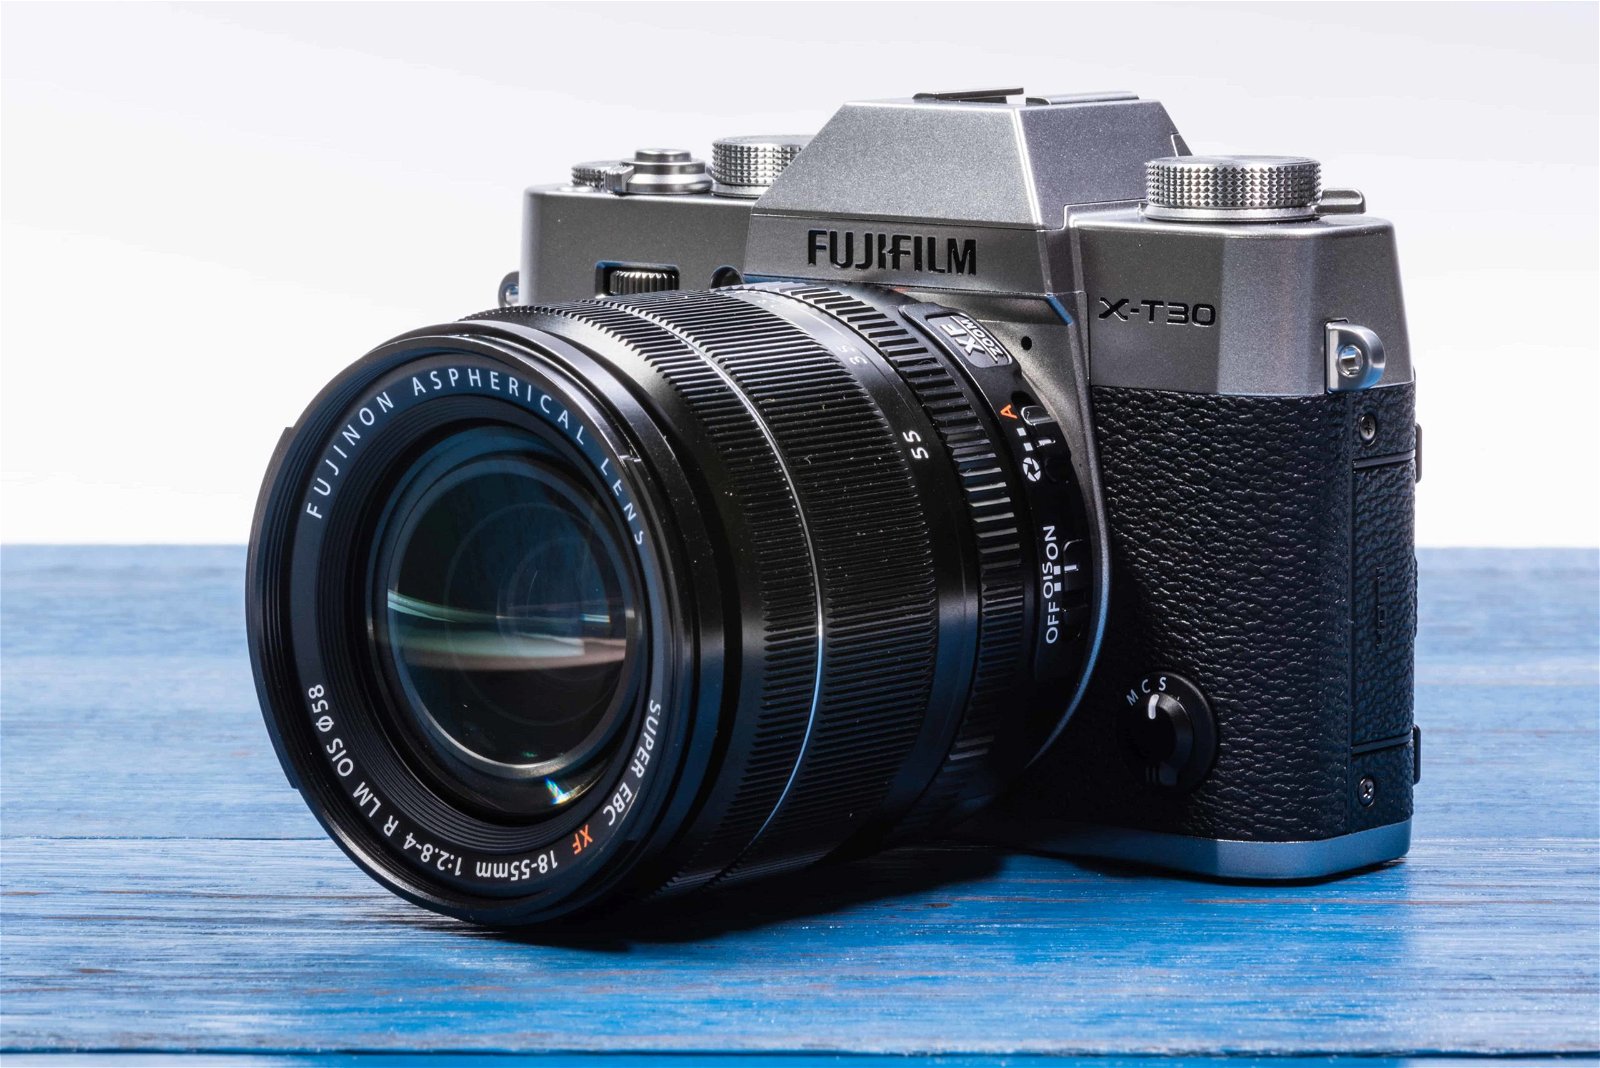 X-T30 has everything you need for fashion photography.